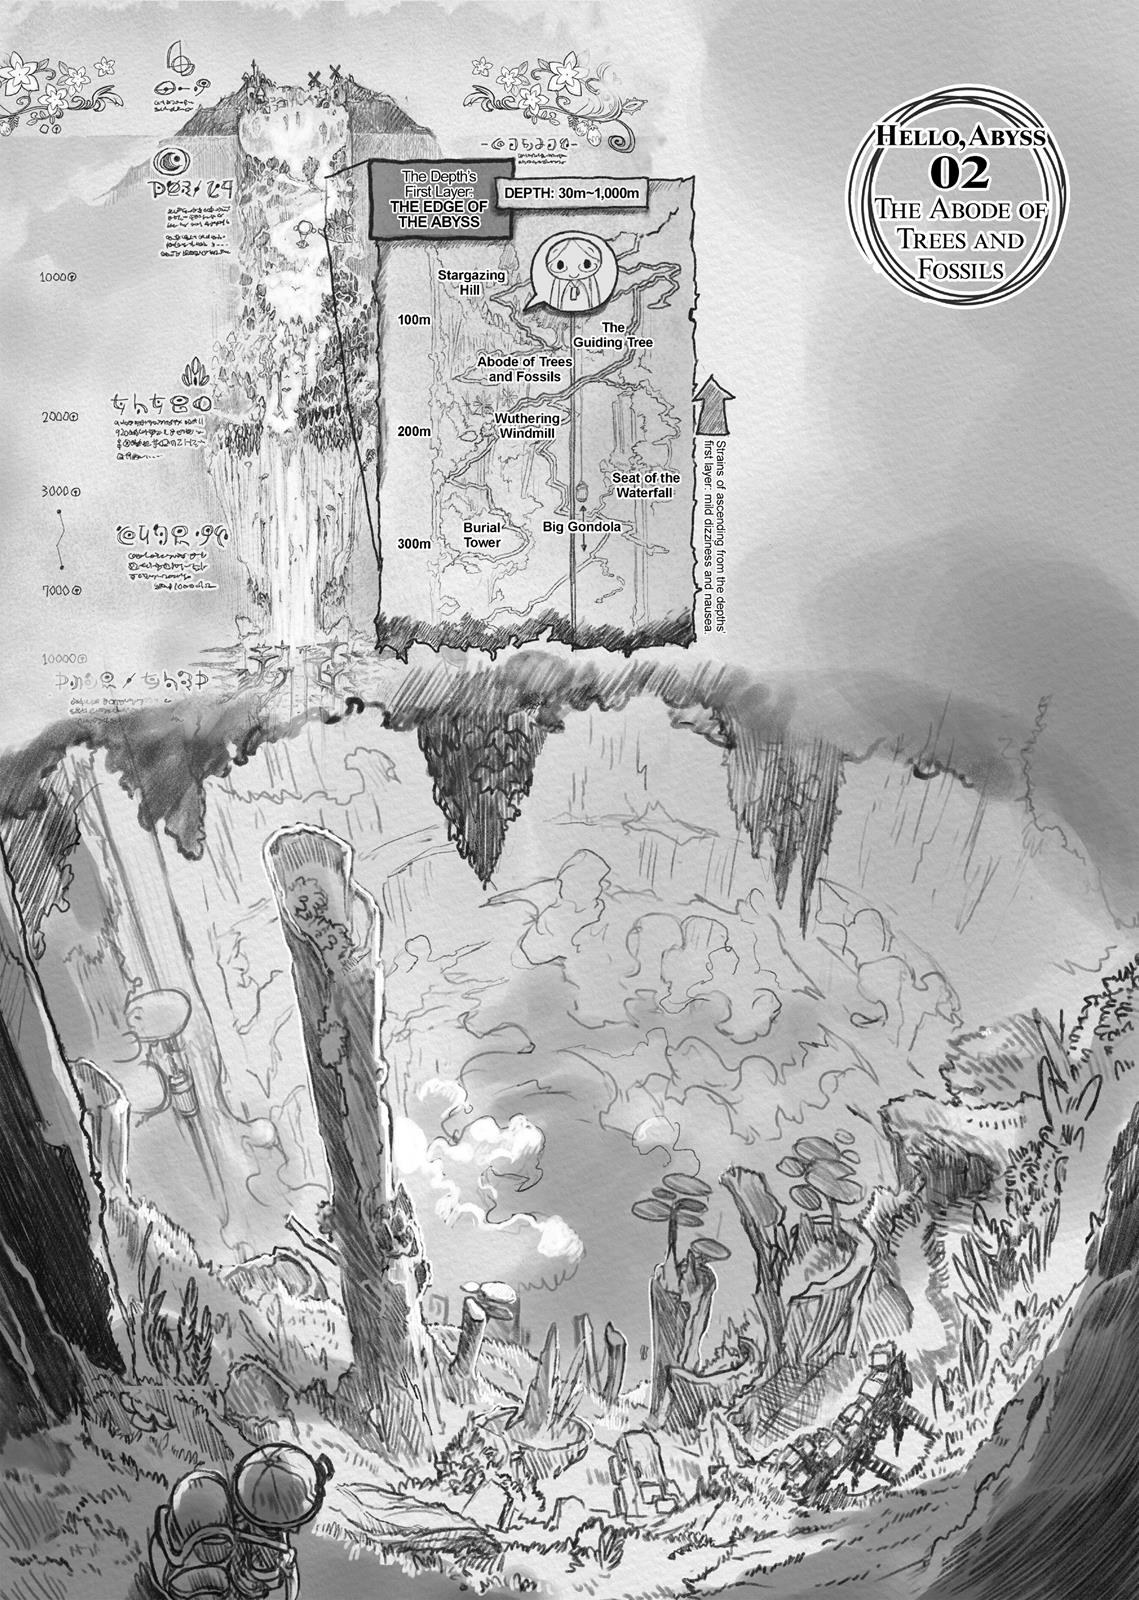 Offical Made in Abyss character heights translated. : r/MadeInAbyss